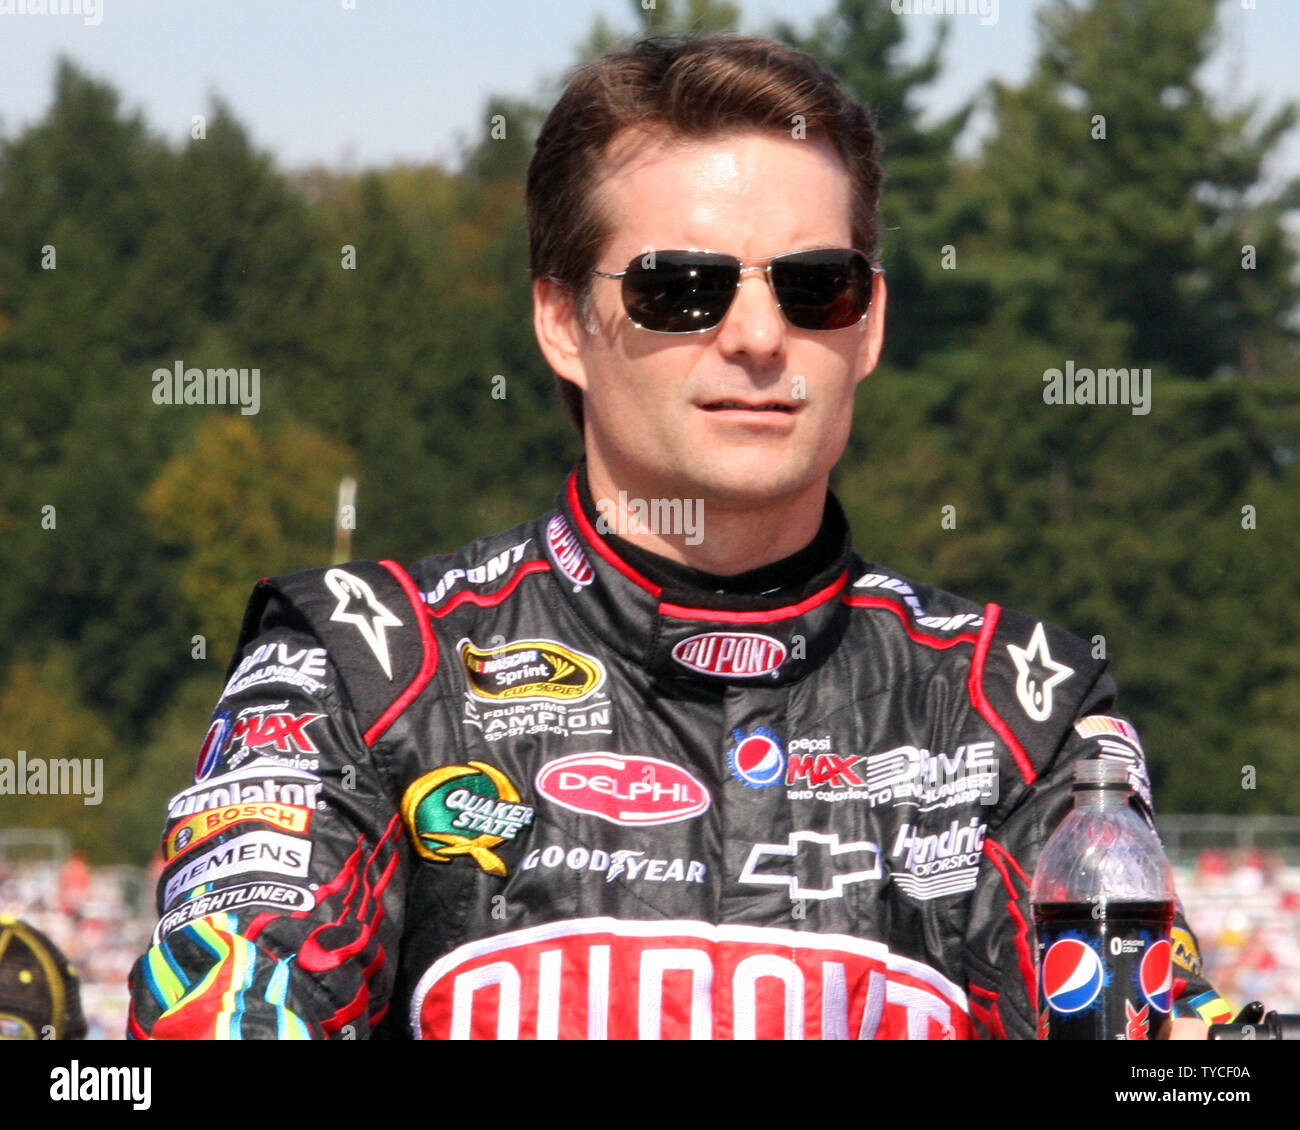 Jeff Gordon during driver introductions before the start of the NASCAR Sprint Cup Series Sylvania 300 at New Hampshire Motor Speedway in Loudon, New Hampshire on September 25, 2011.  UPI/Malcolm Hope Stock Photo